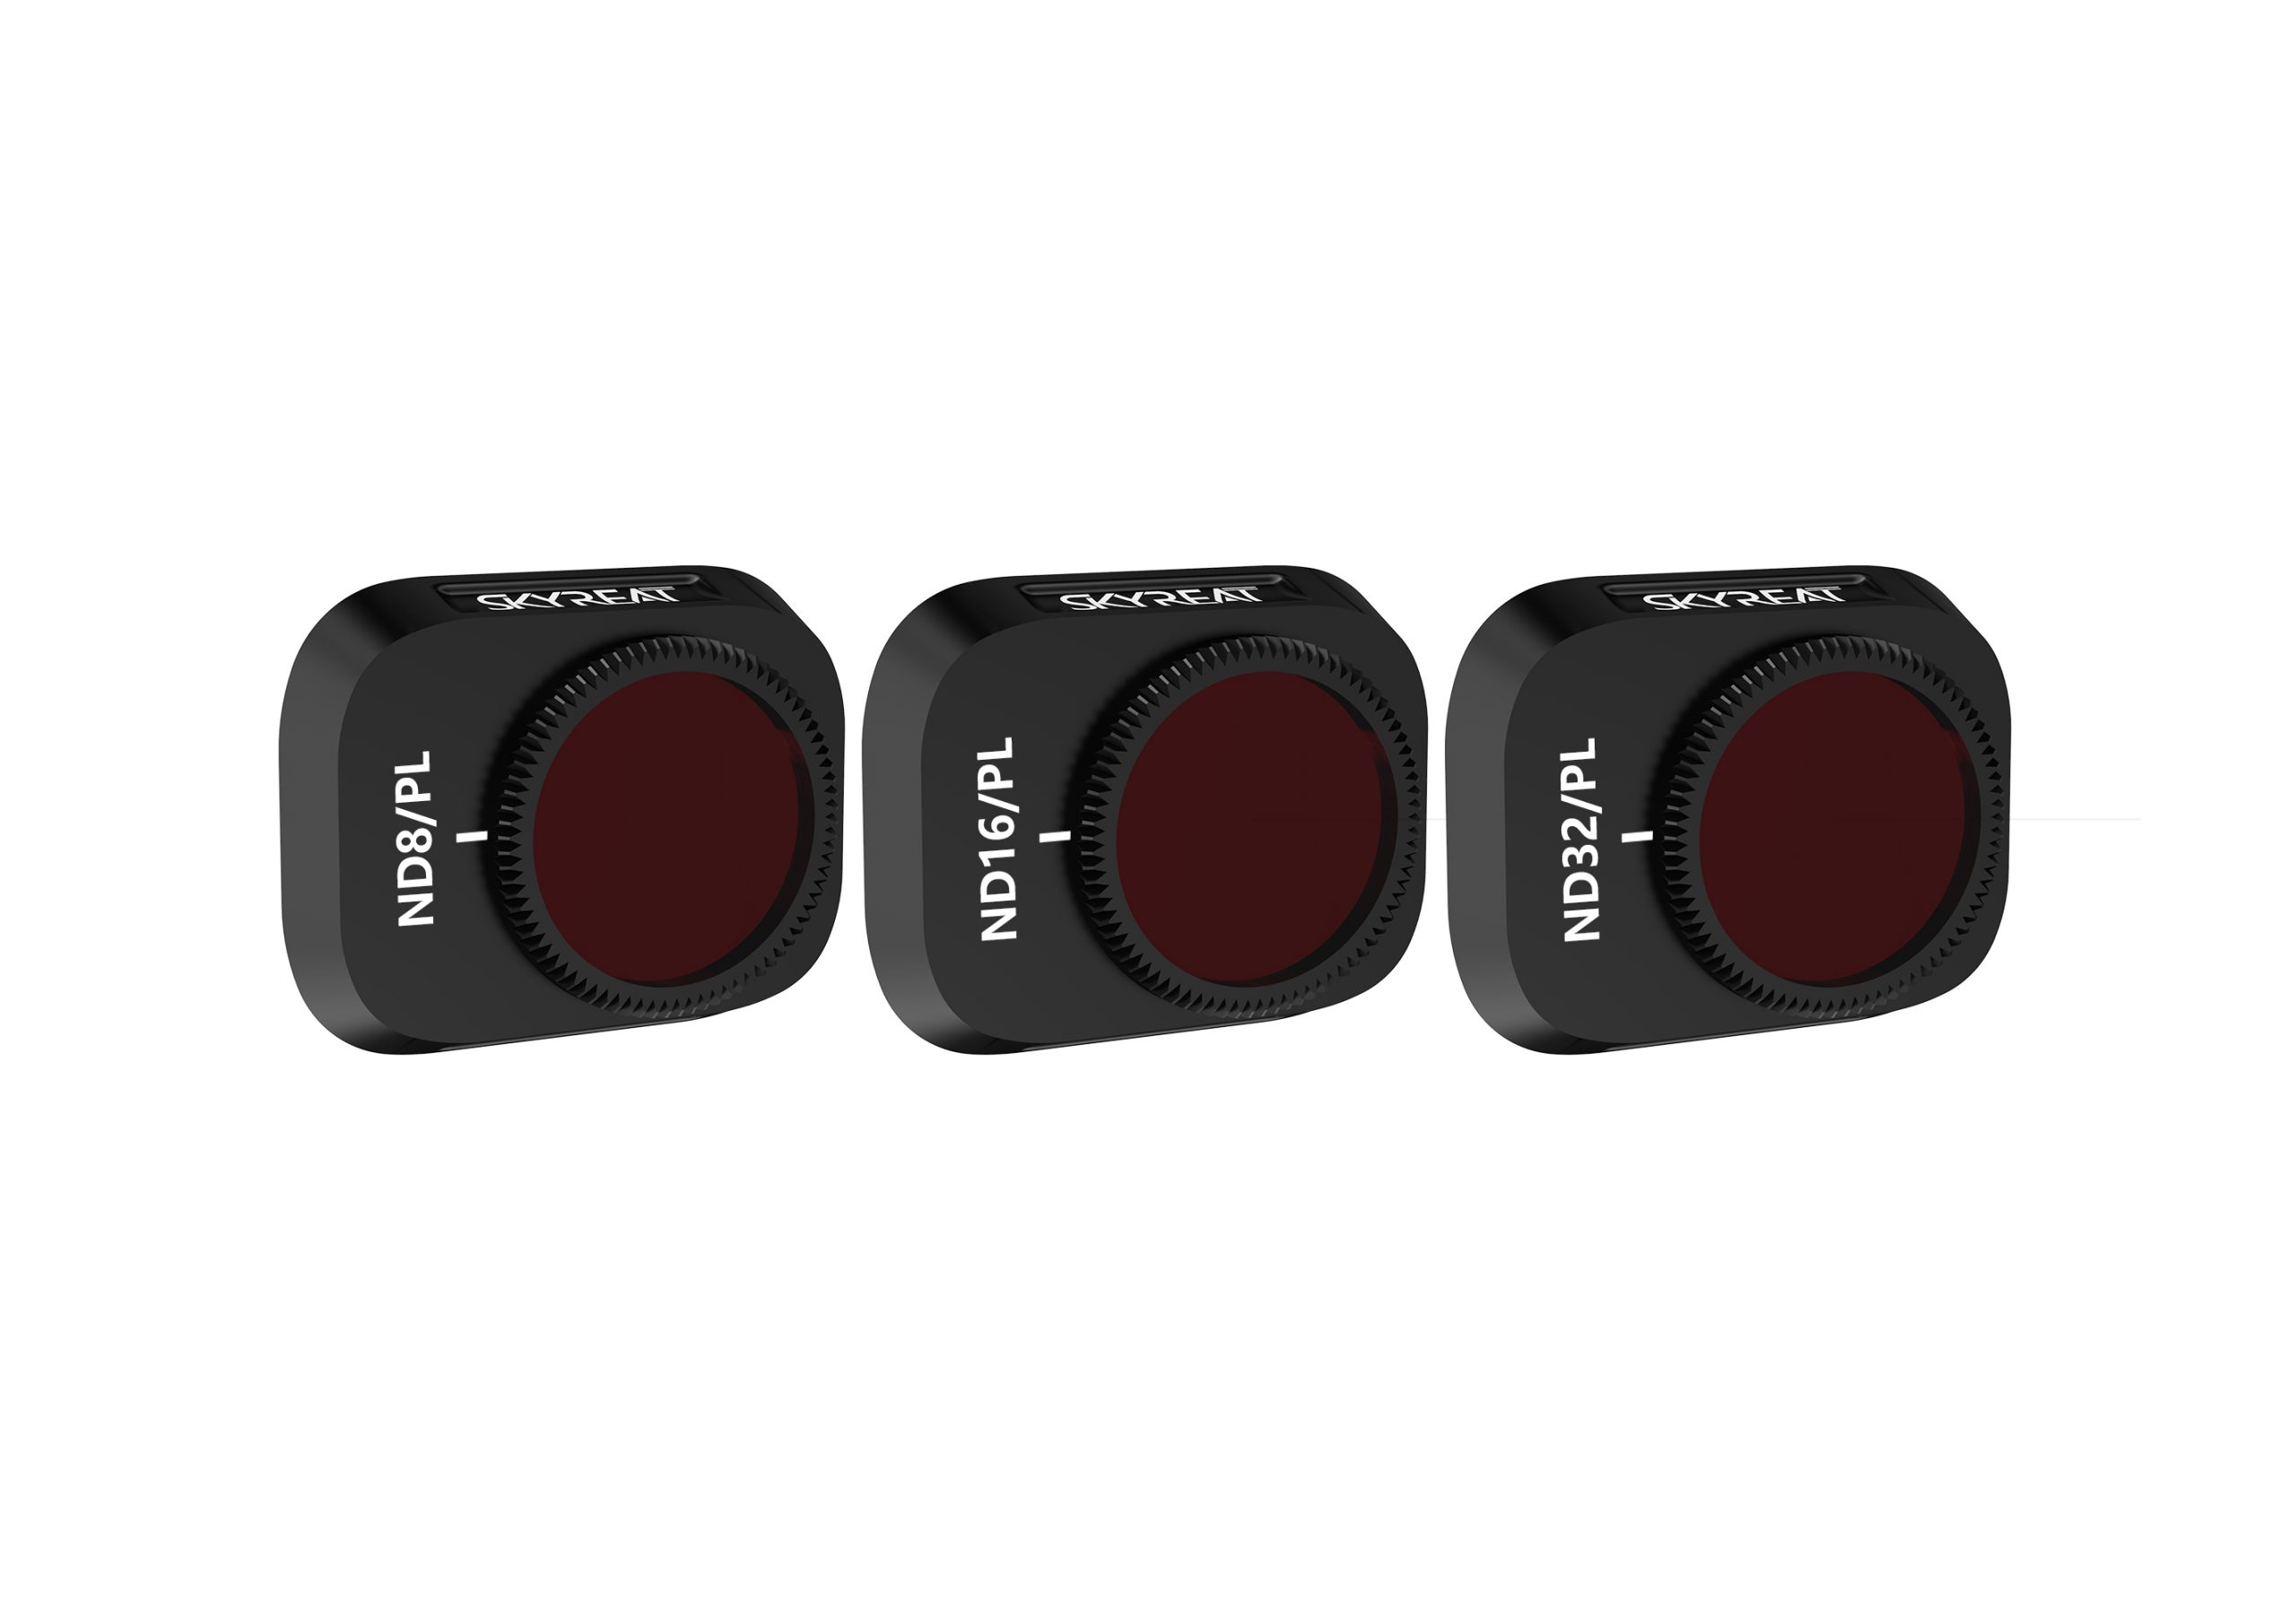 Compatible with DJI Osmo Action Accessories Skyreat Camera Lens ND Filters Set 6 Pack- ND4, ND8, ND16, ND4PL, ND8PL, ND16PL 